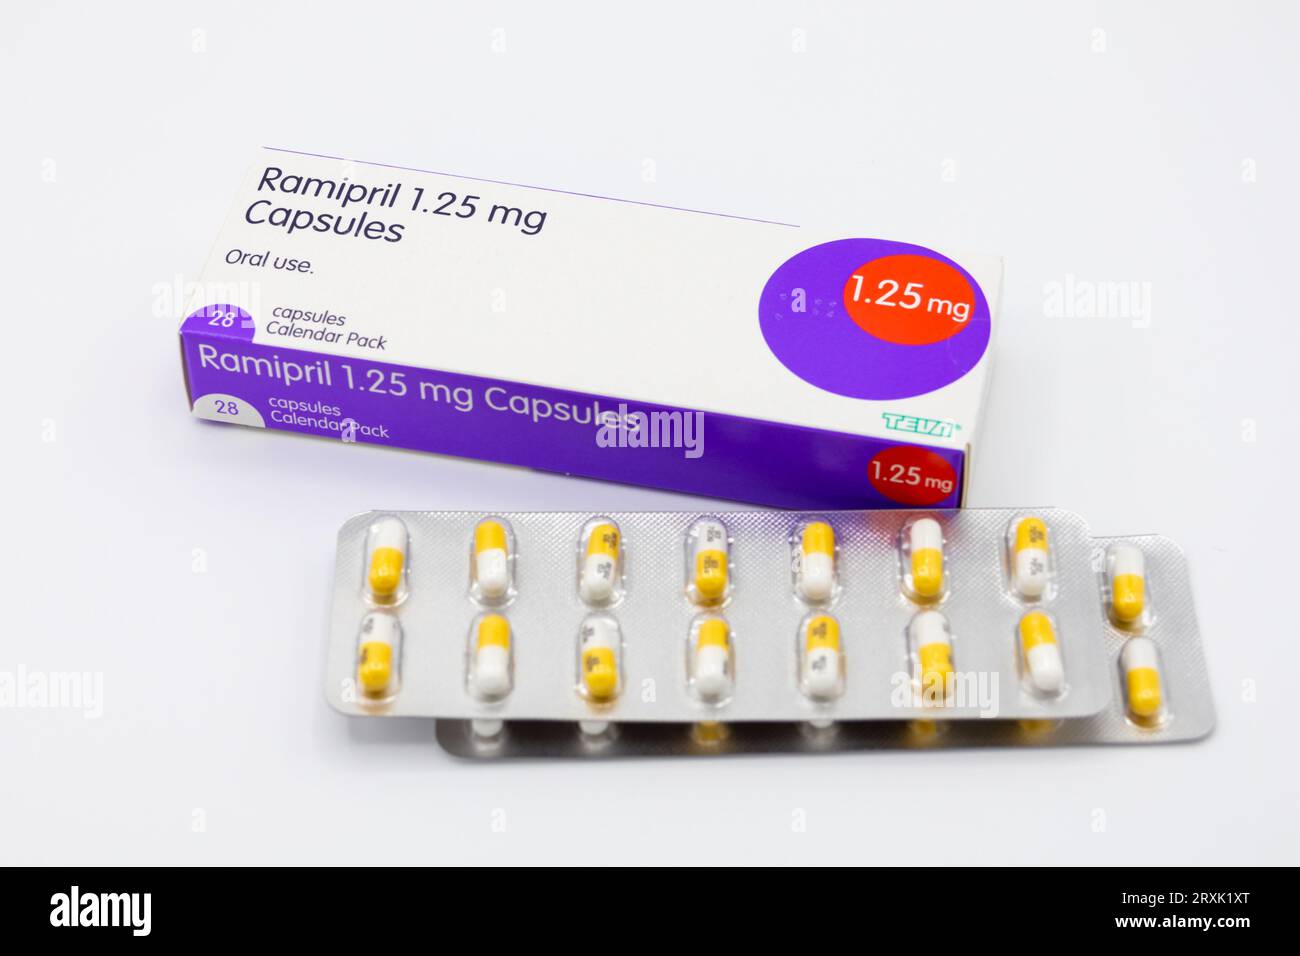 Ramipril 1.25 mg capsules, high blood pressure pills, uk PHOTO ONLY NO PRODUCT SENT Stock Photo